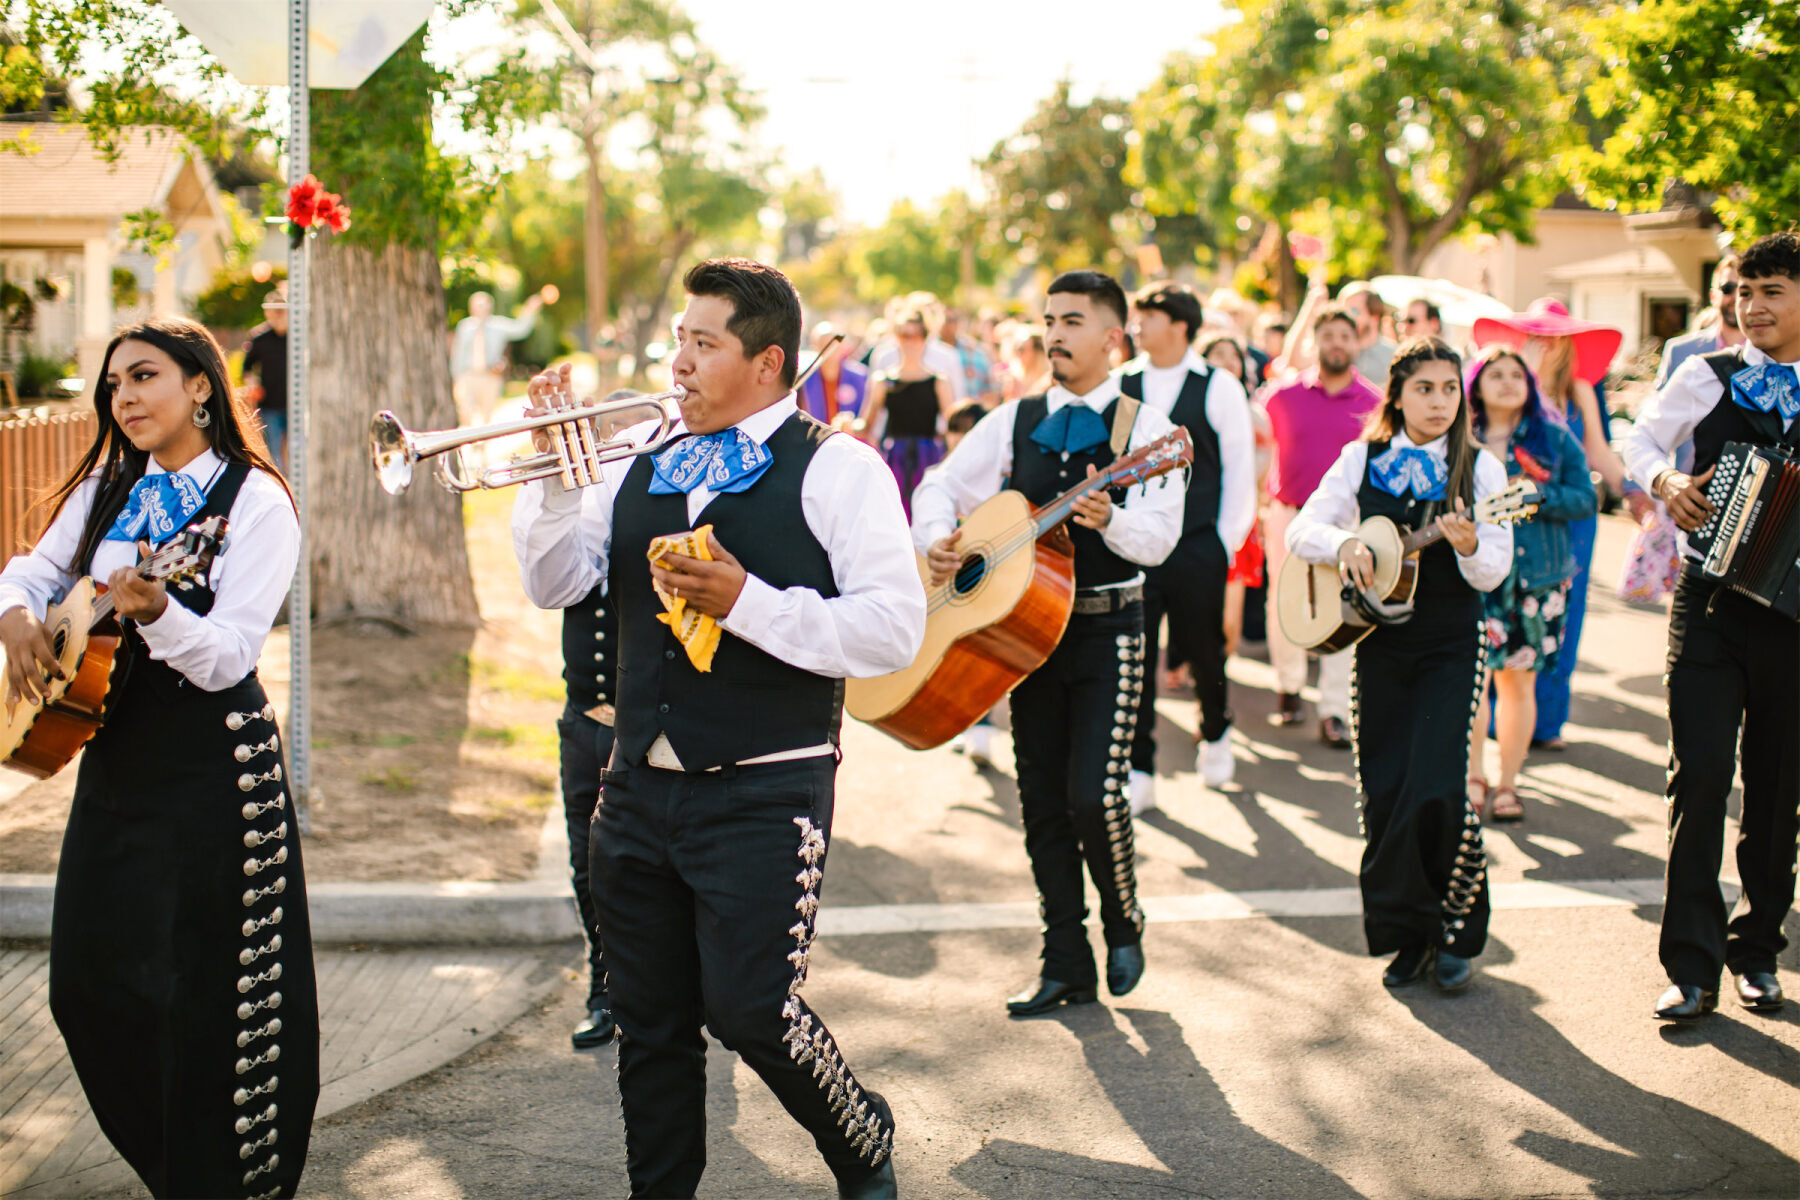 A mariachi band led guests on a parade between the ceremony and cocktail hour of a vibrant, outdoor wedding.